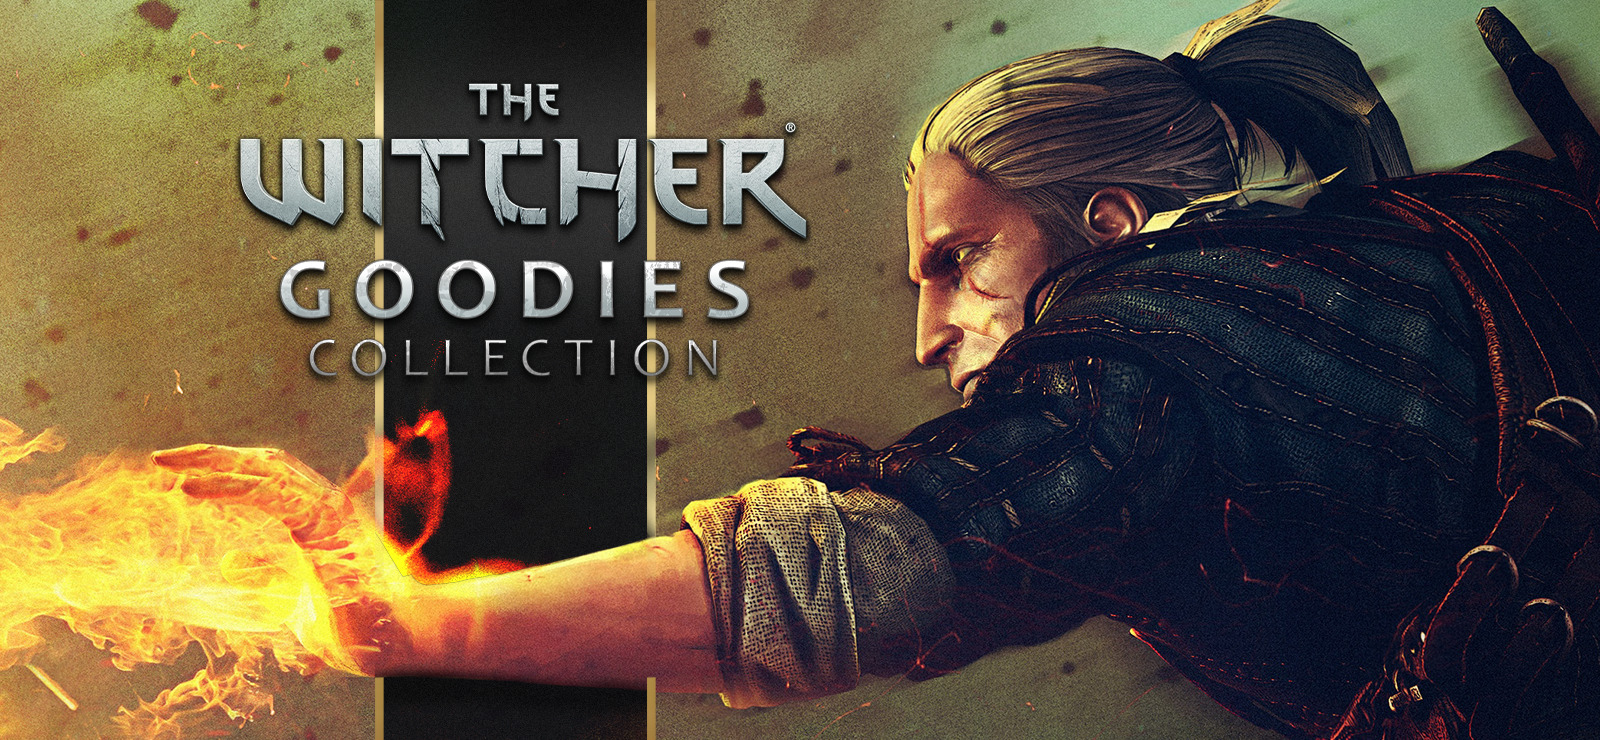 The Witcher - Goodies Collection GOG CD Key [$ 2.54]